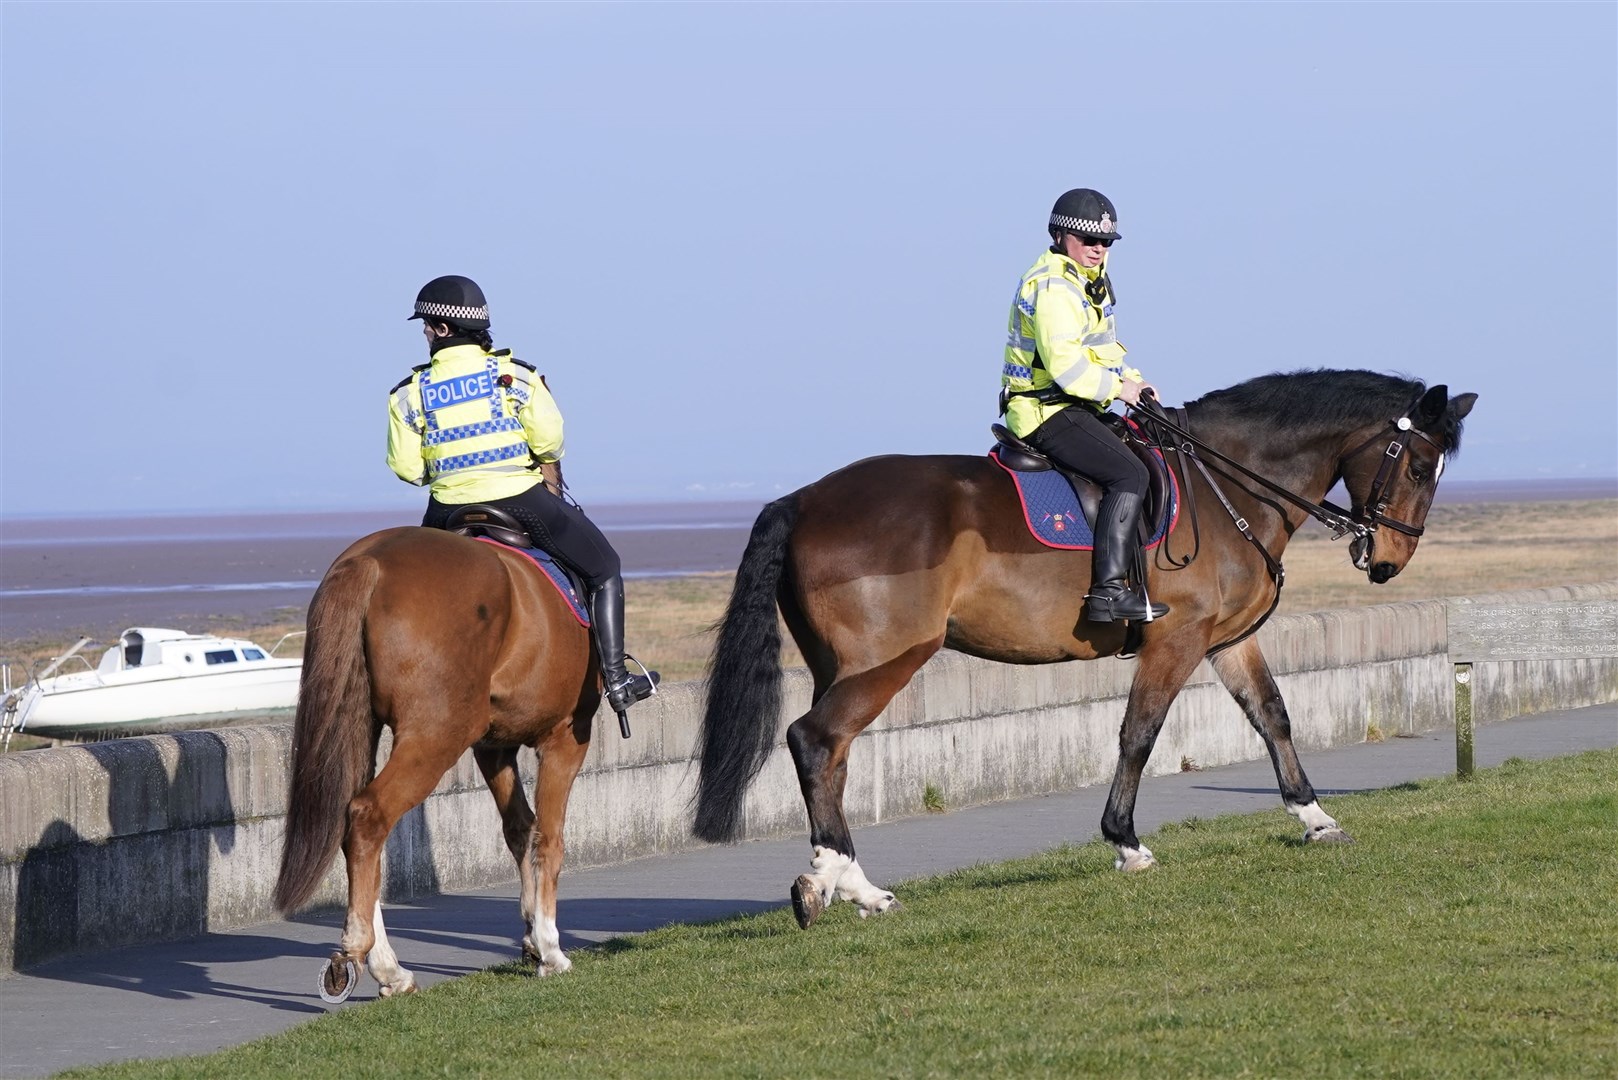 Mounted police in Knott End-on-Sea take part in the search for missing woman Nicola Bulley (Danny Lawson/PA)